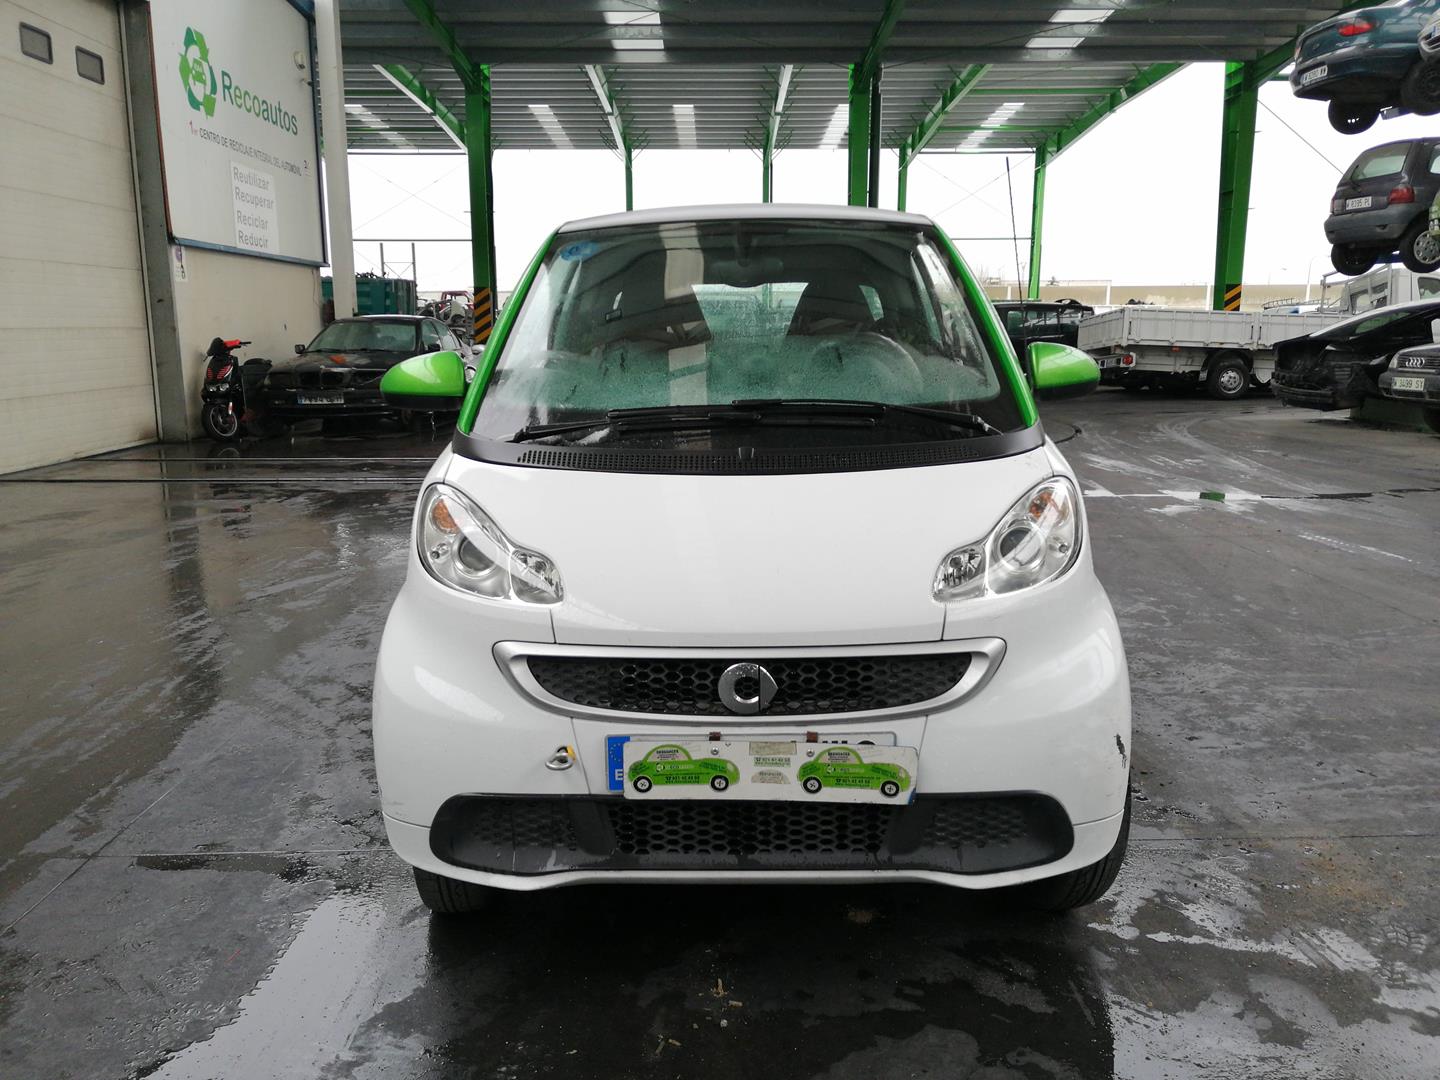 SMART Fortwo 2 generation (2007-2015) Bootlid Rear Boot A4517570006CA6L, BLANCO, 2PUERTAS 24549694